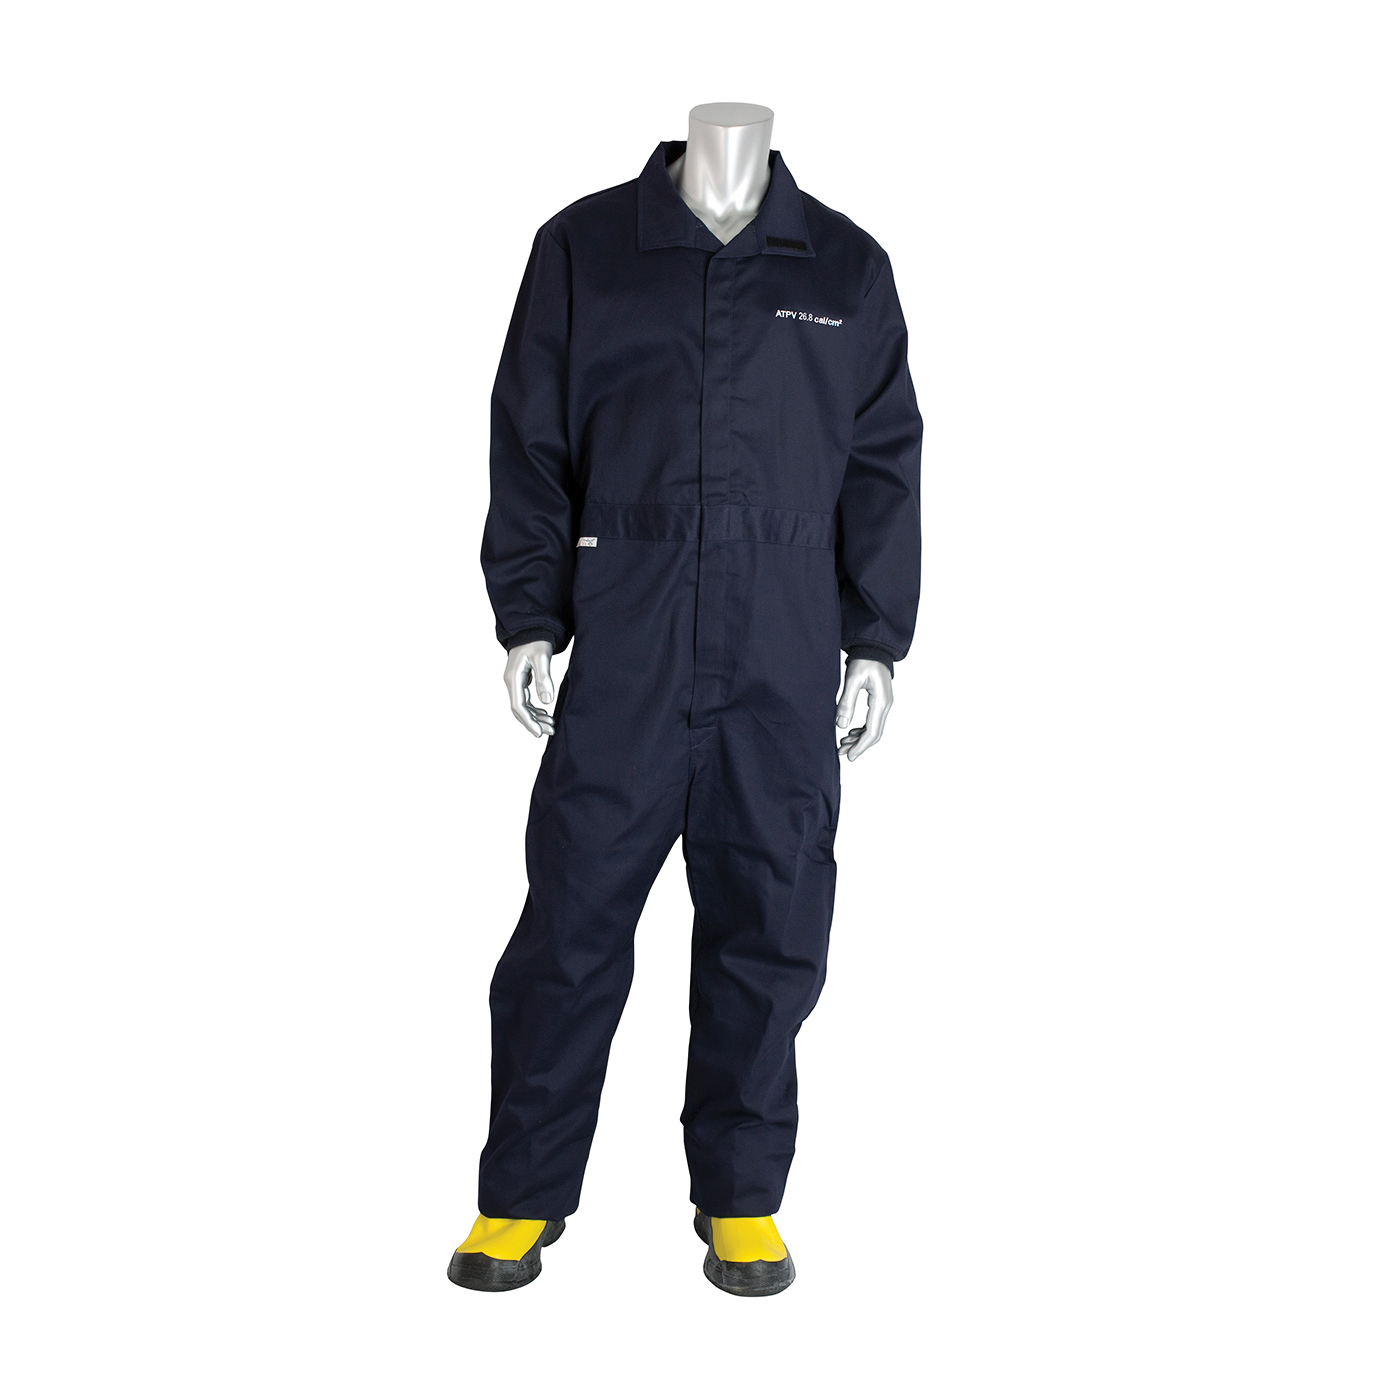 PIP® 9100-52772/L Flame Resistant Coverall, L, Navy, Westex® Ultra Soft®/88% Cotton/12% Nylon, 44 to 46 in Chest, 32 in L Inseam